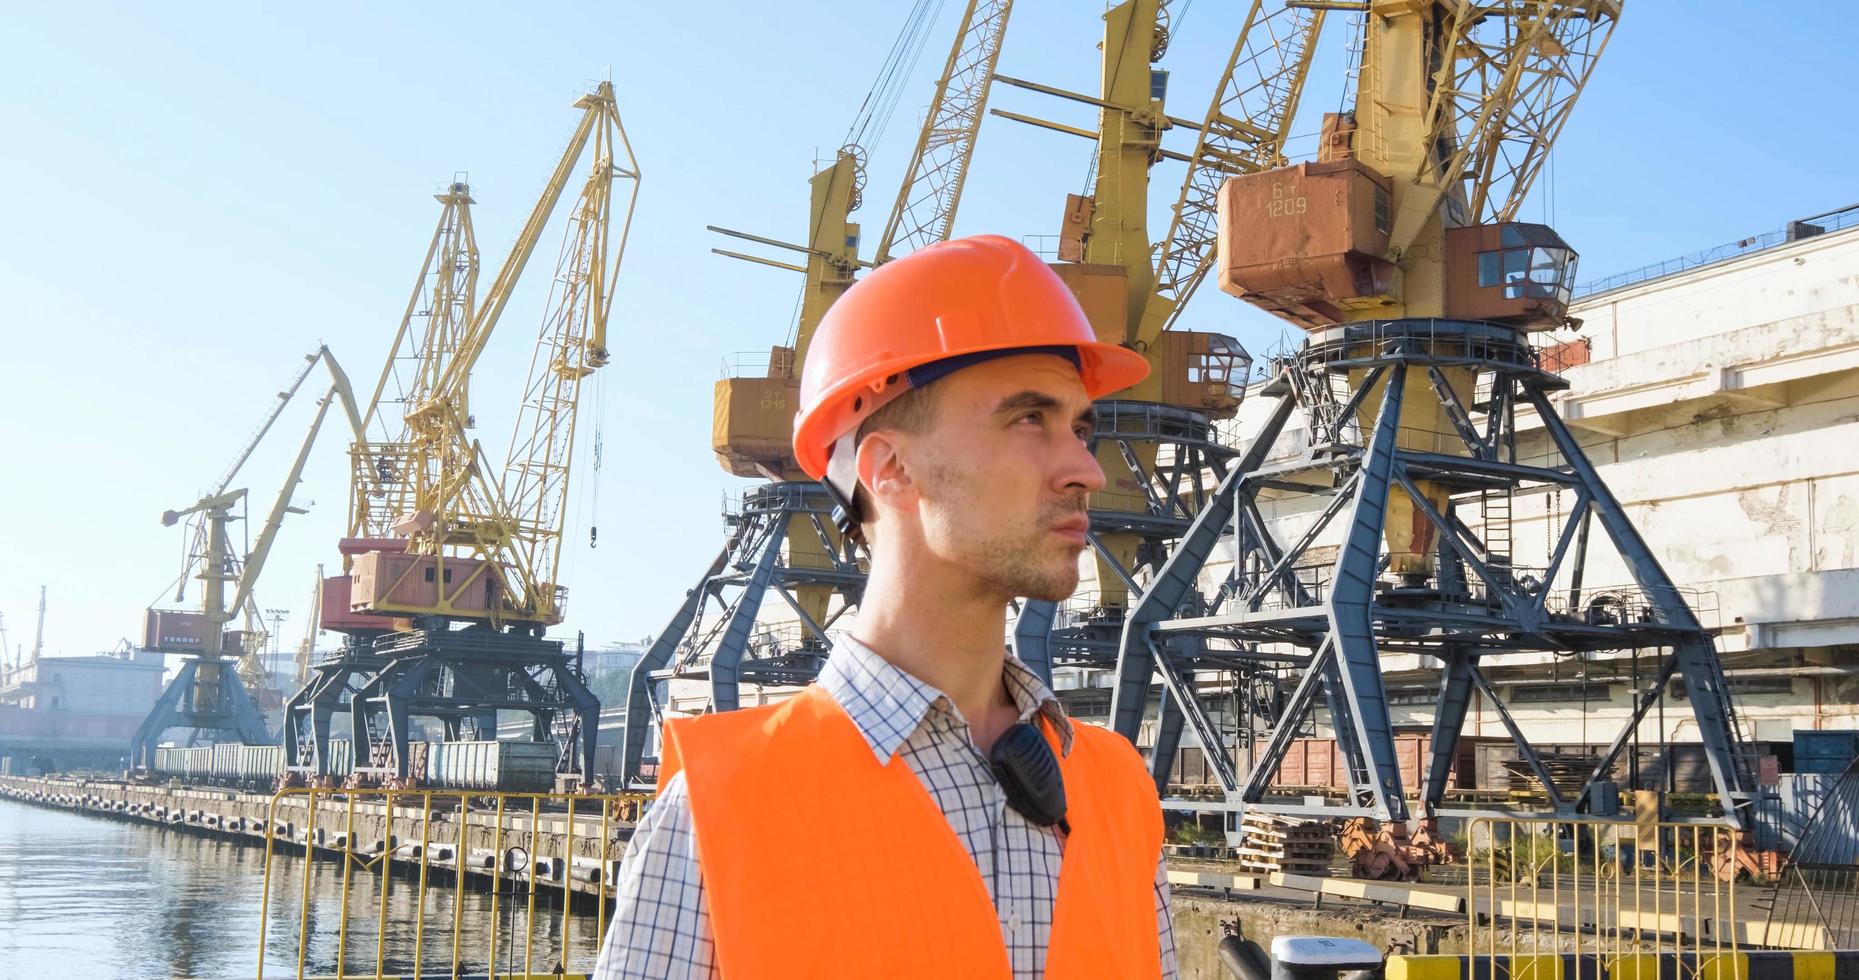 male worker of sea harbor in orange helmet and safety west, cranes and sea background photo